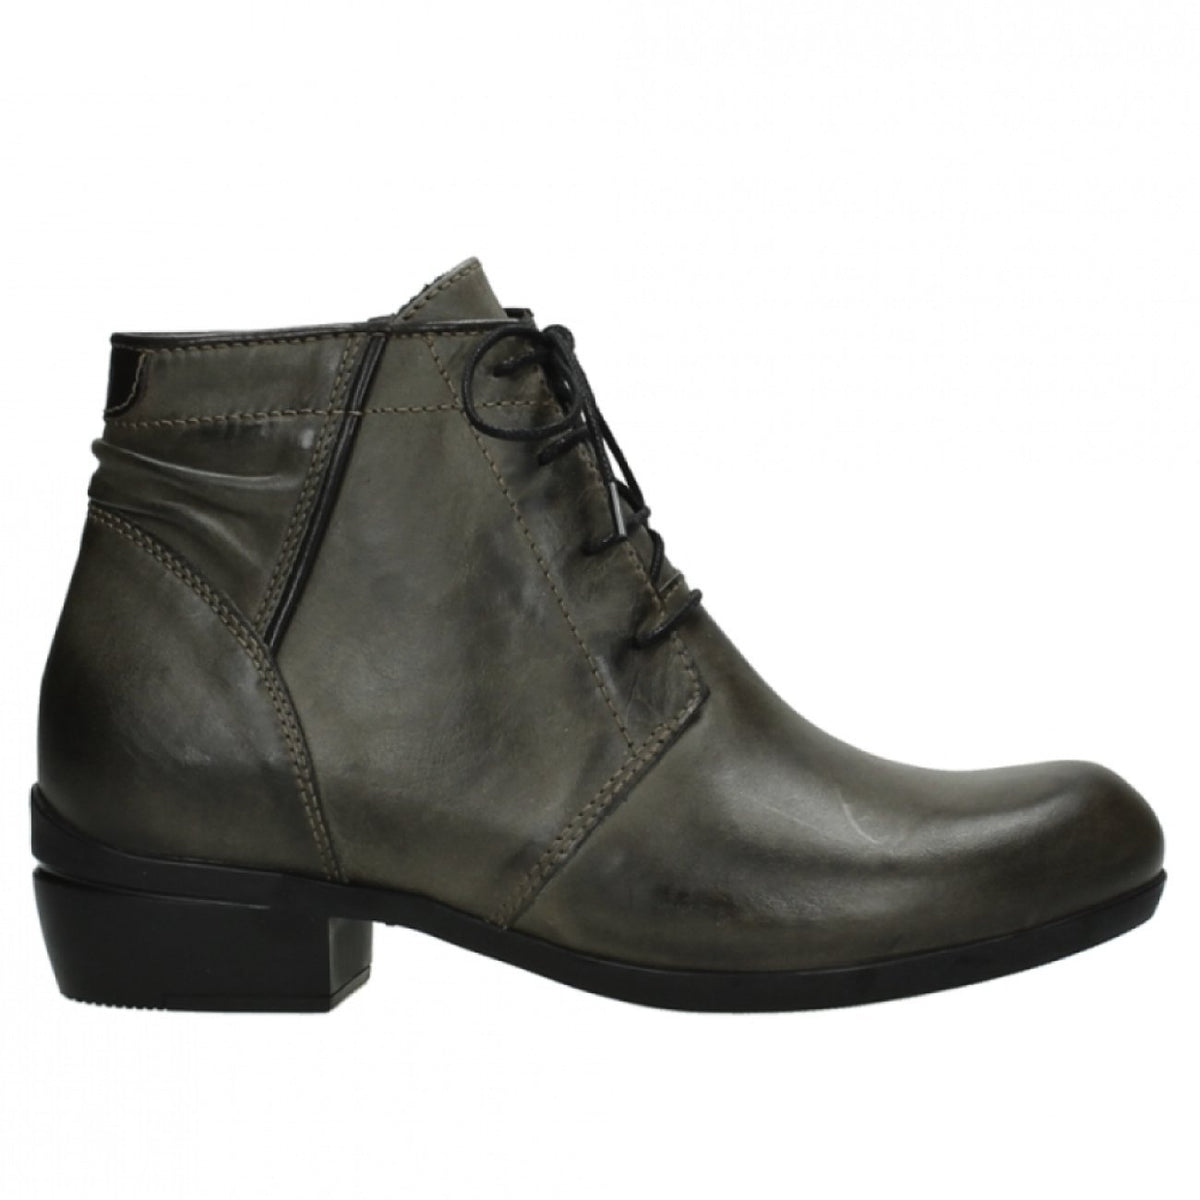 Wolky, Delano, Softy Wax Leather, Laceup Boot, Taupe Boots Wolky 